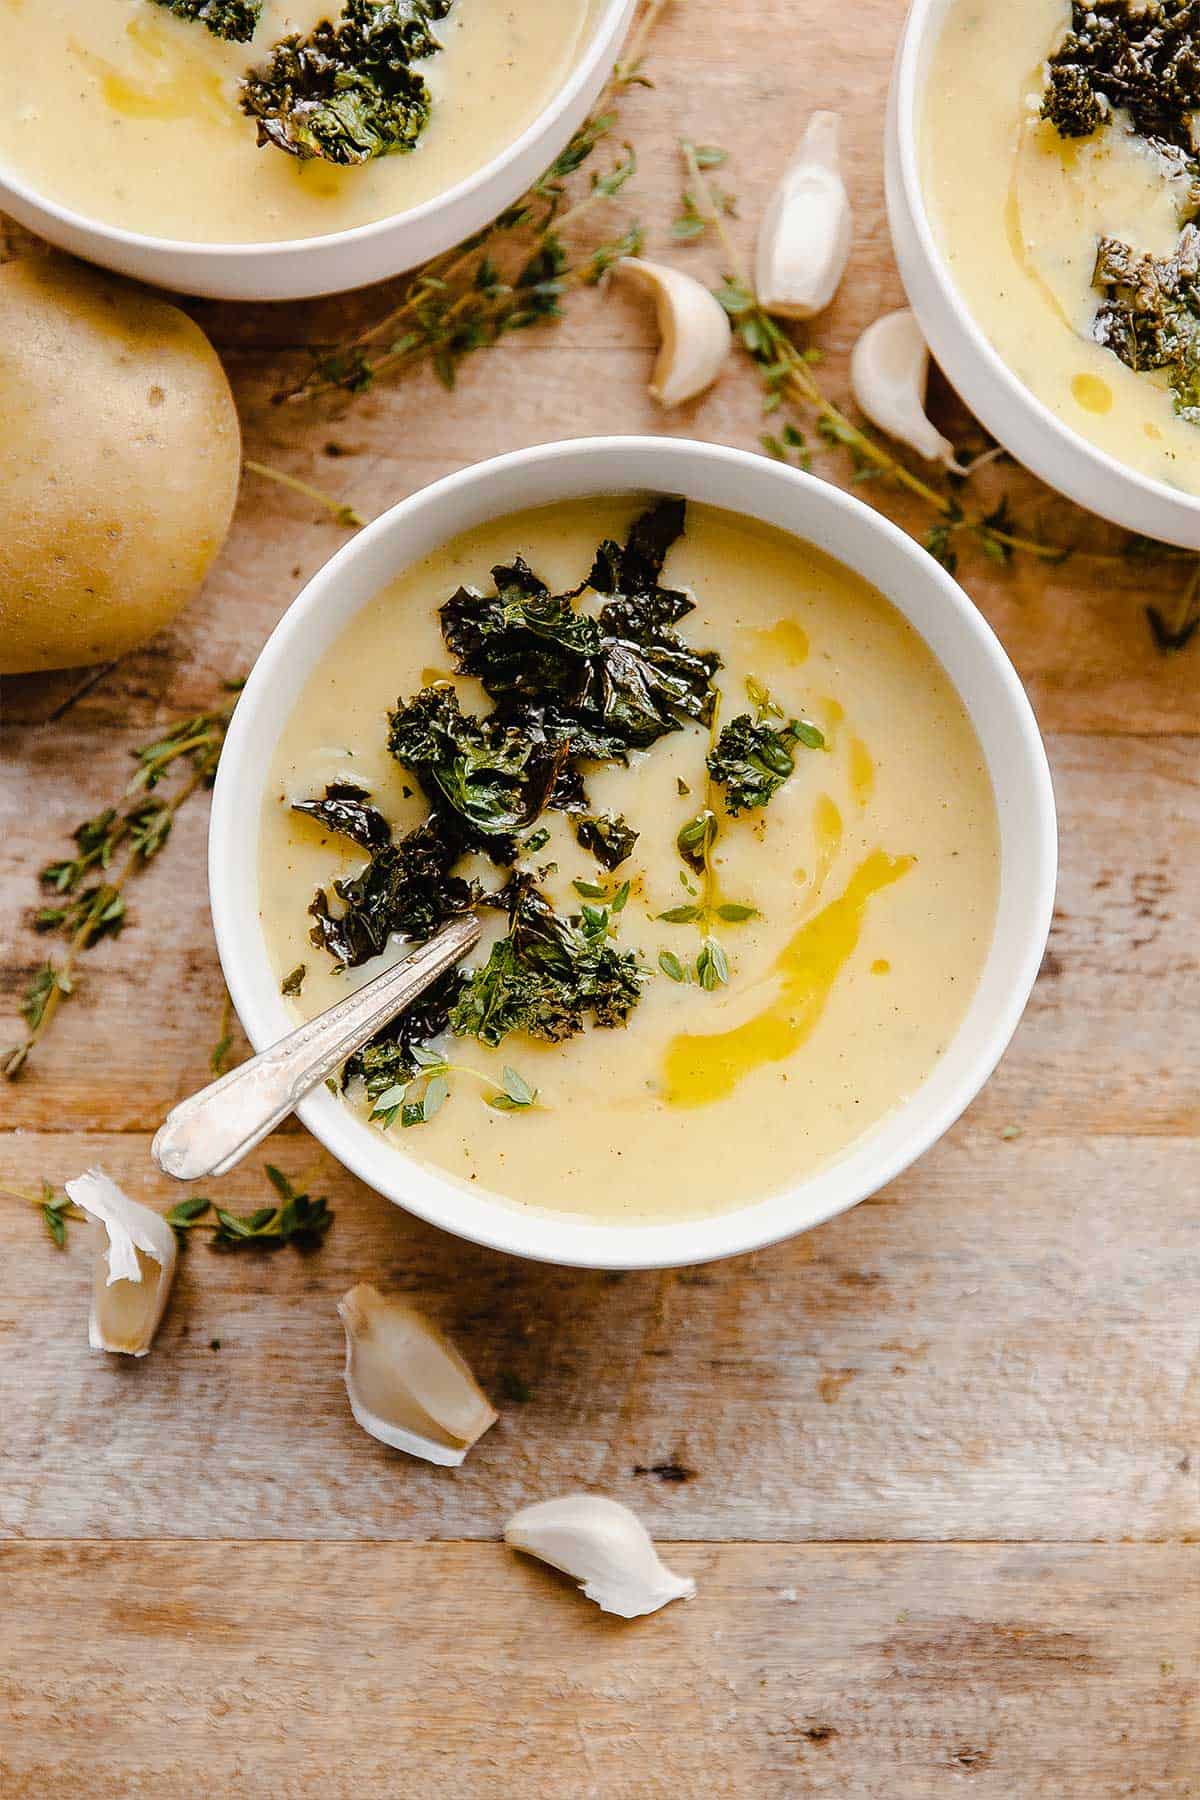 Bowls of homemade potato soup on the table topped with crispy kale.